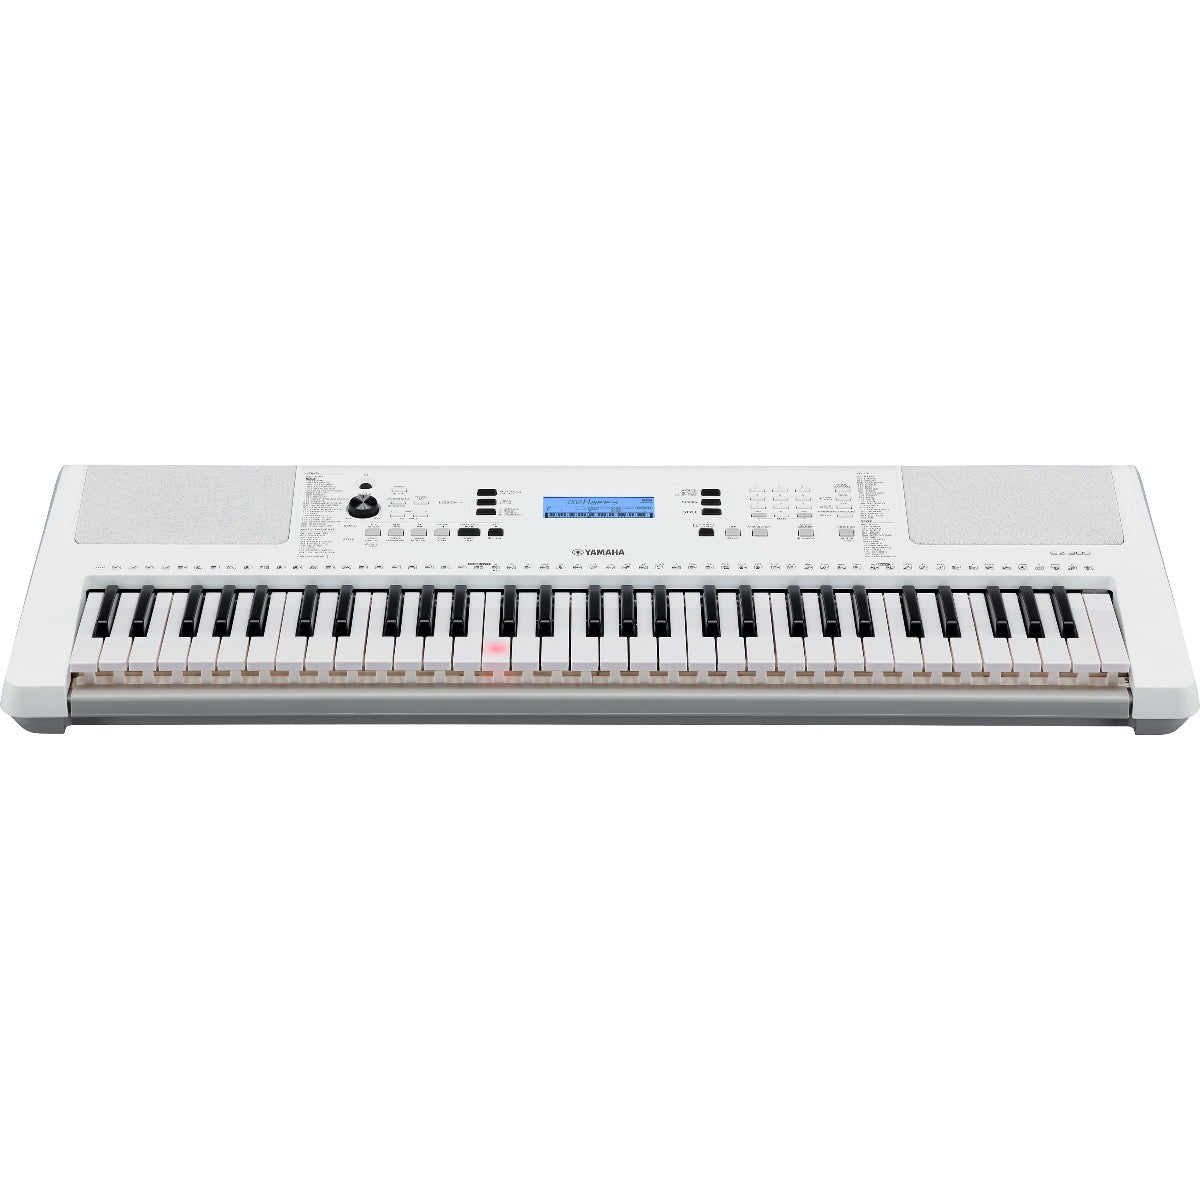 Perspective view of Yamaha EZ-300 Portable Keyboard showing top and front